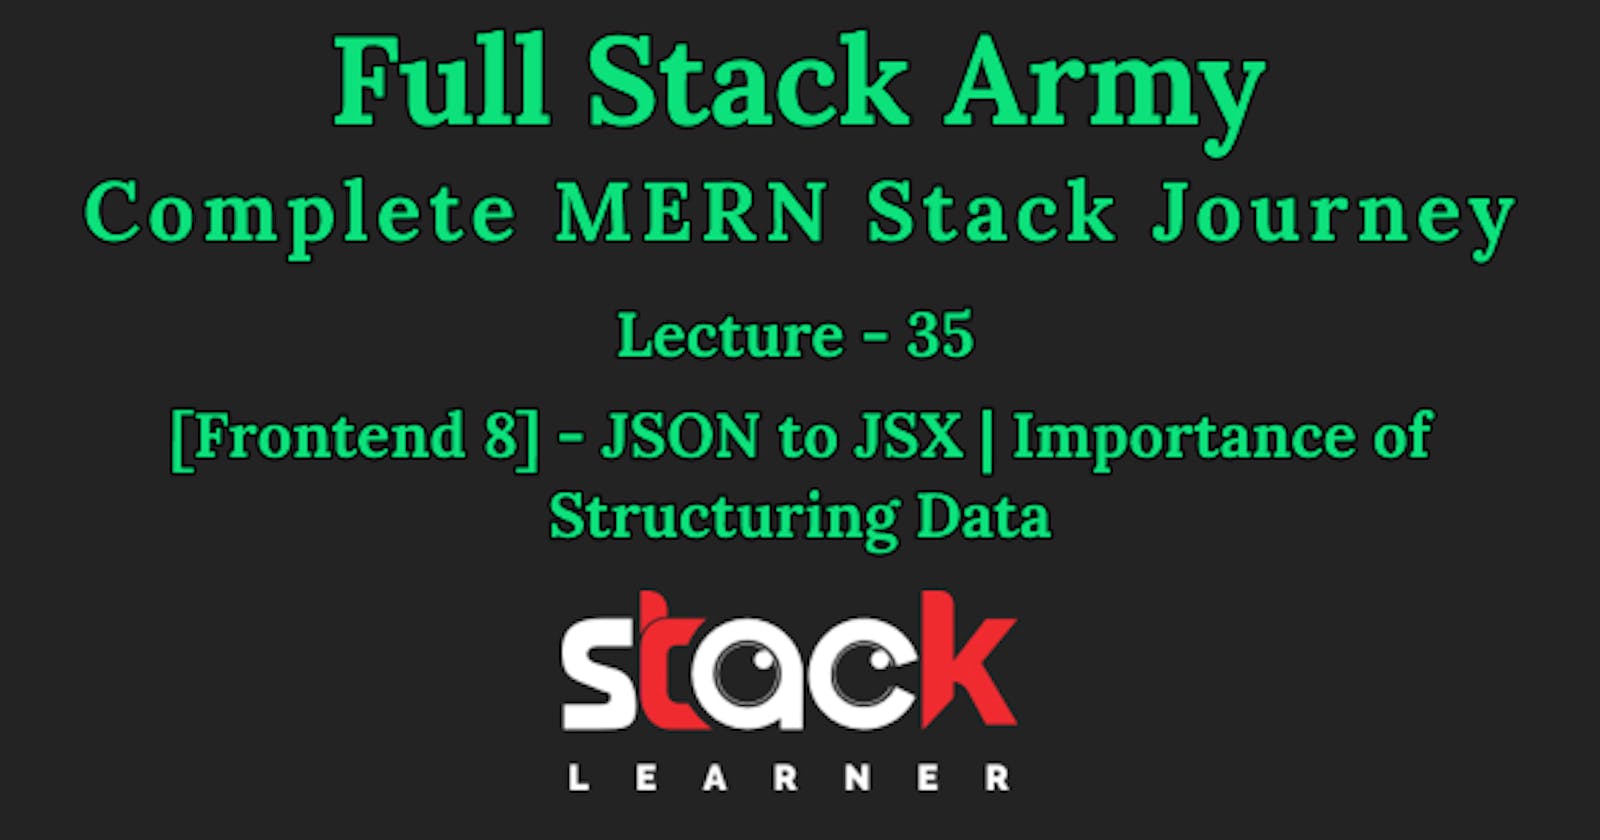 Lecture 35 [Frontend 8] - JSON to JSX | Importance of Structuring Data